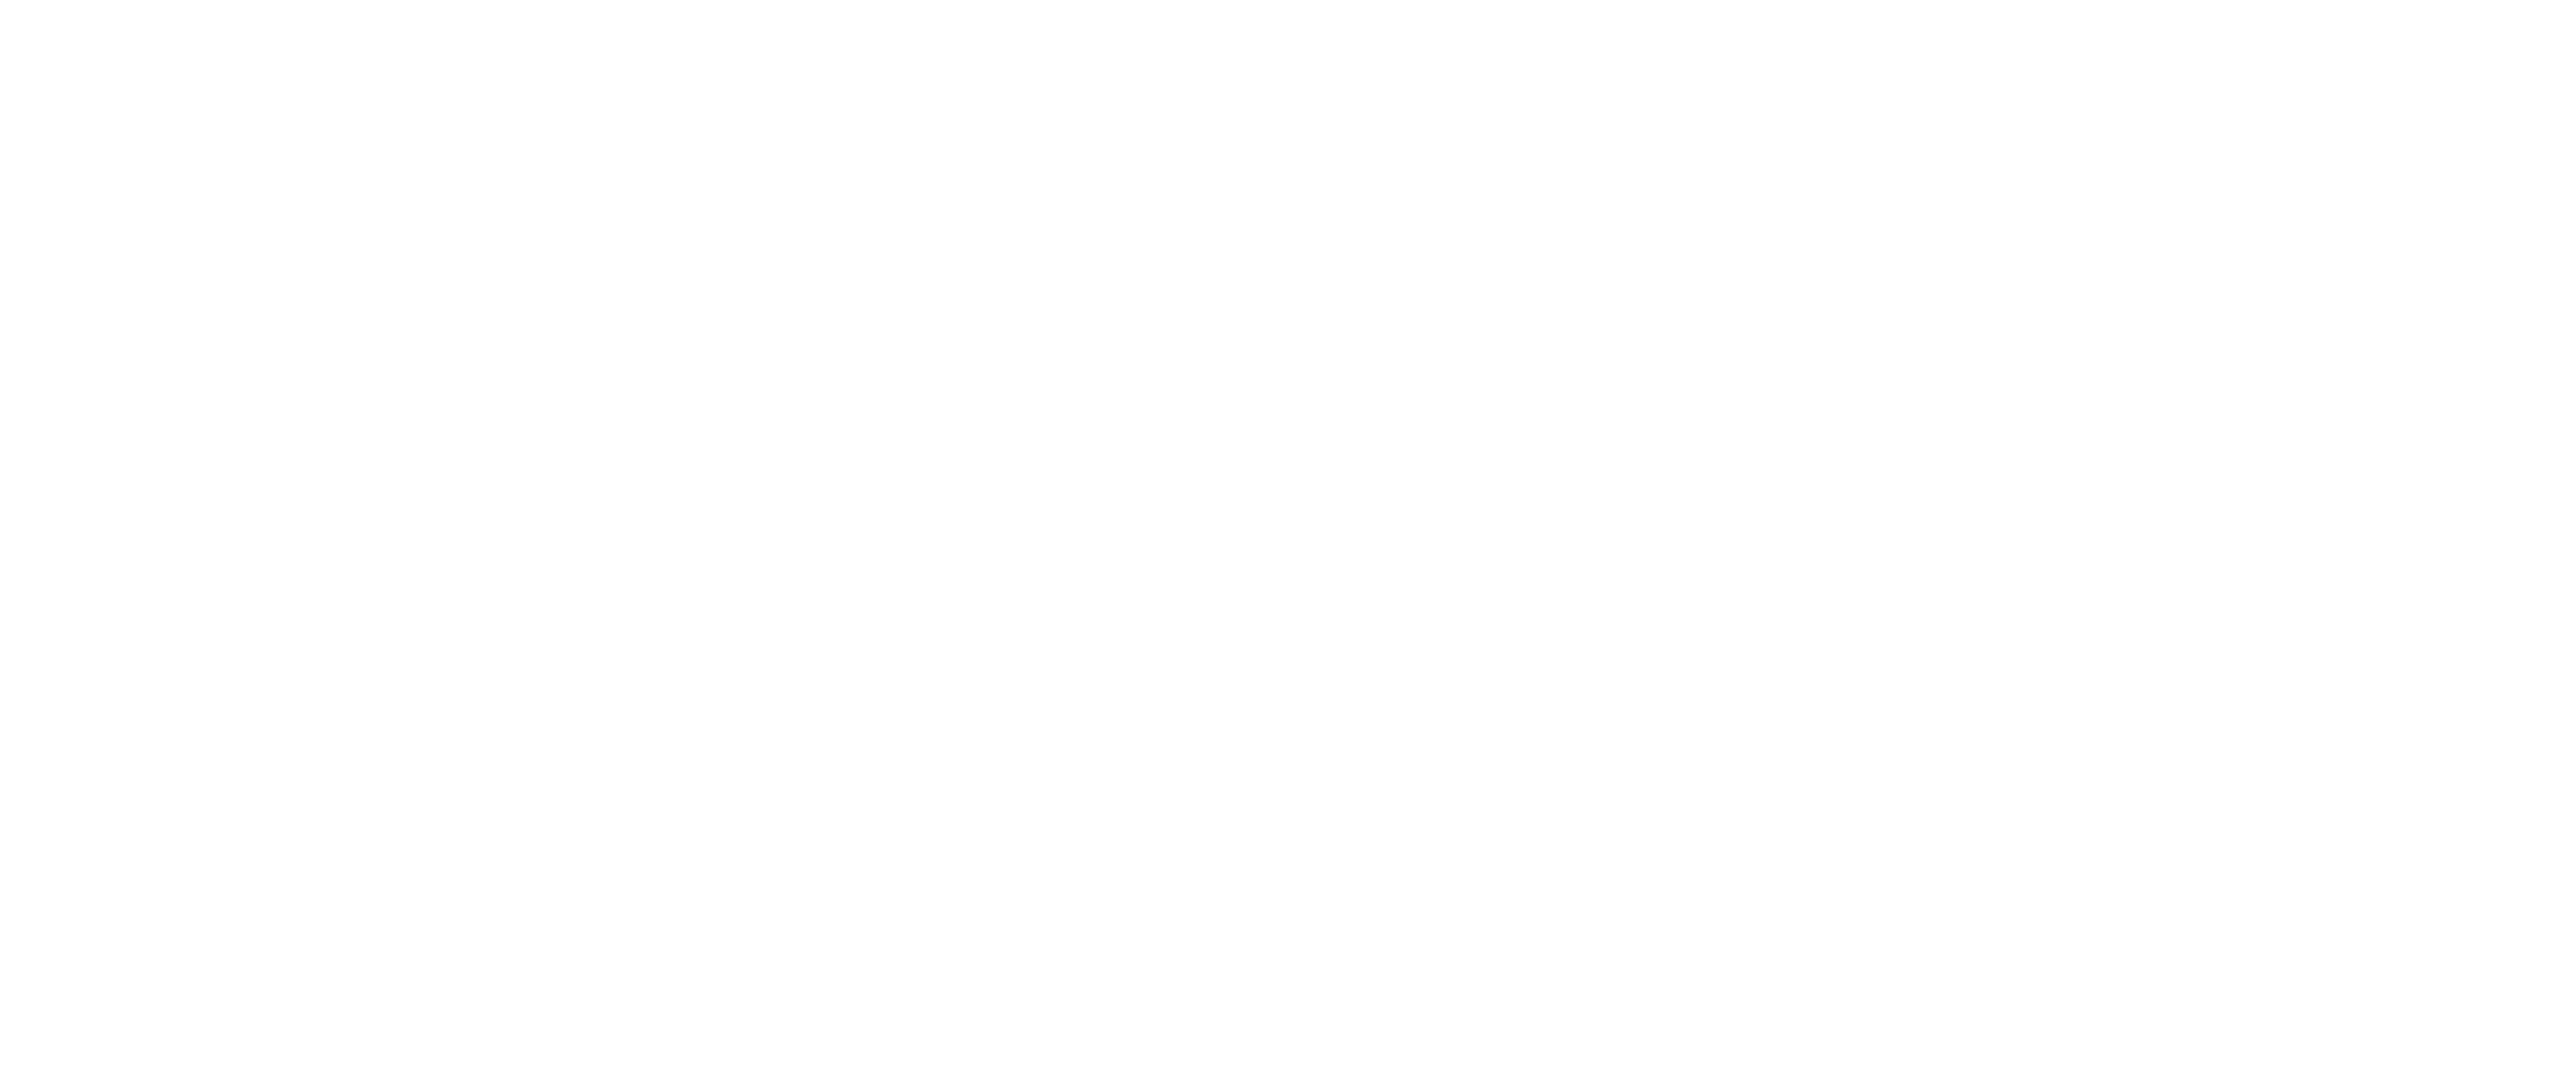 Pacific Clinics, A Merger of Uplift Family Services and Pacific Clinics